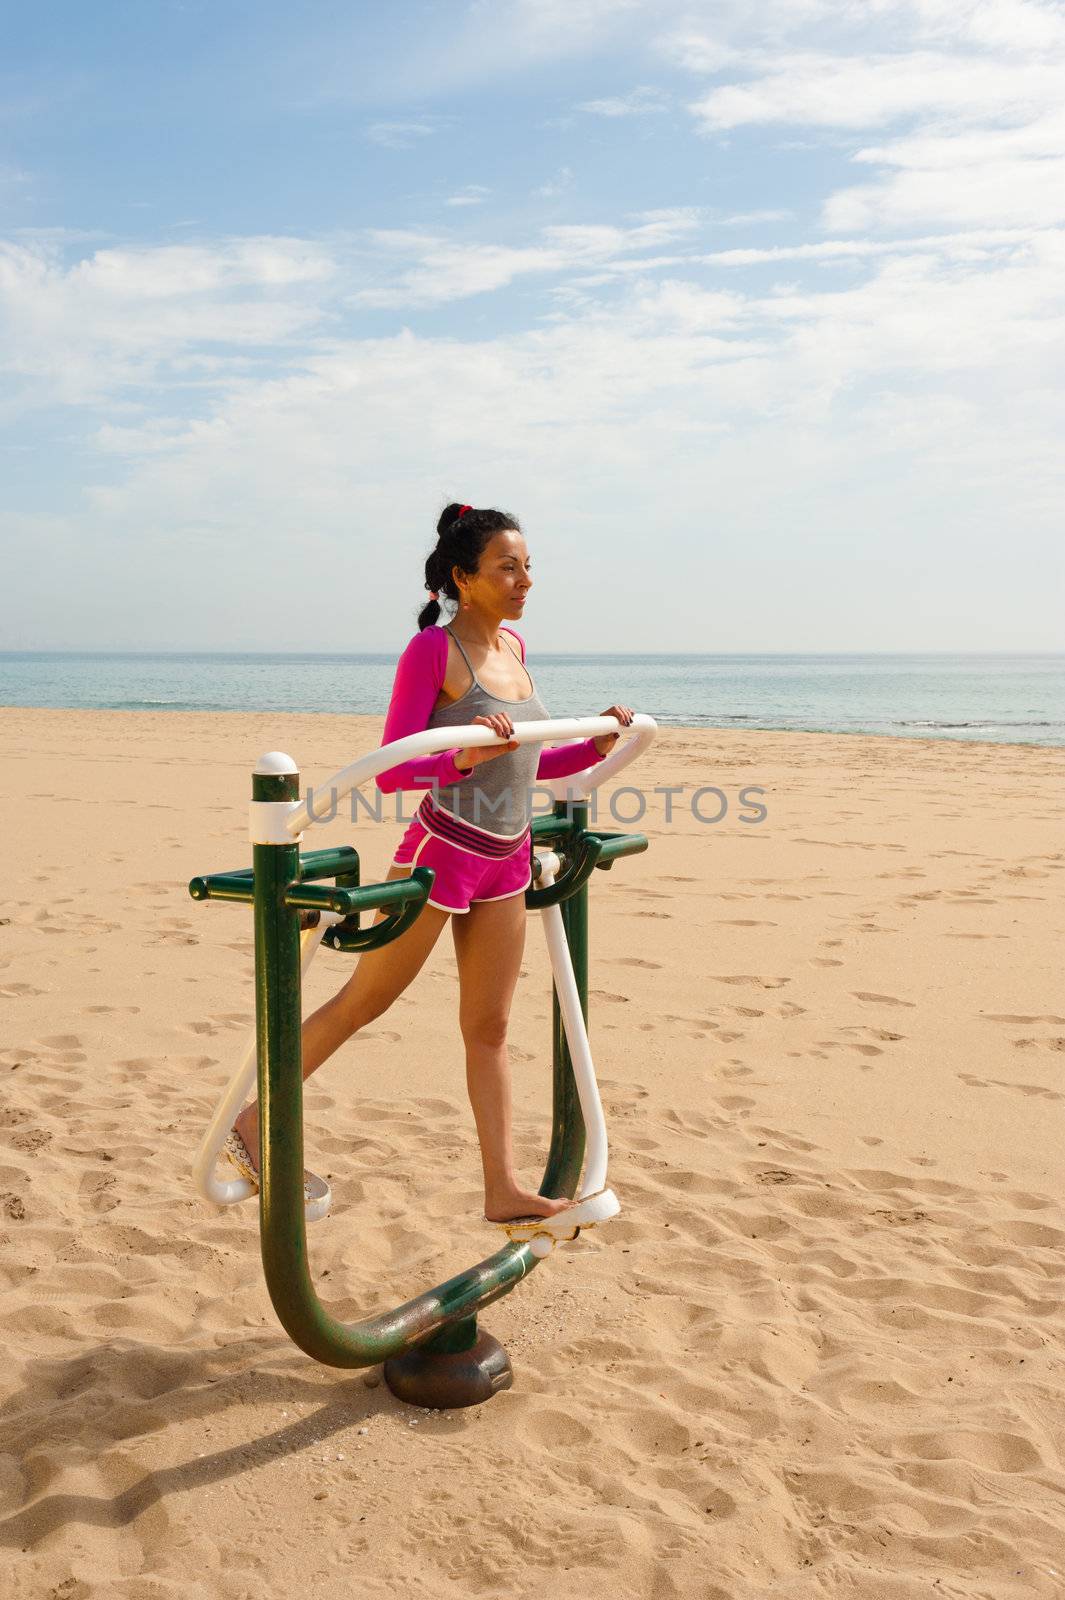 A fitness machine on the beach, an ideal workout location